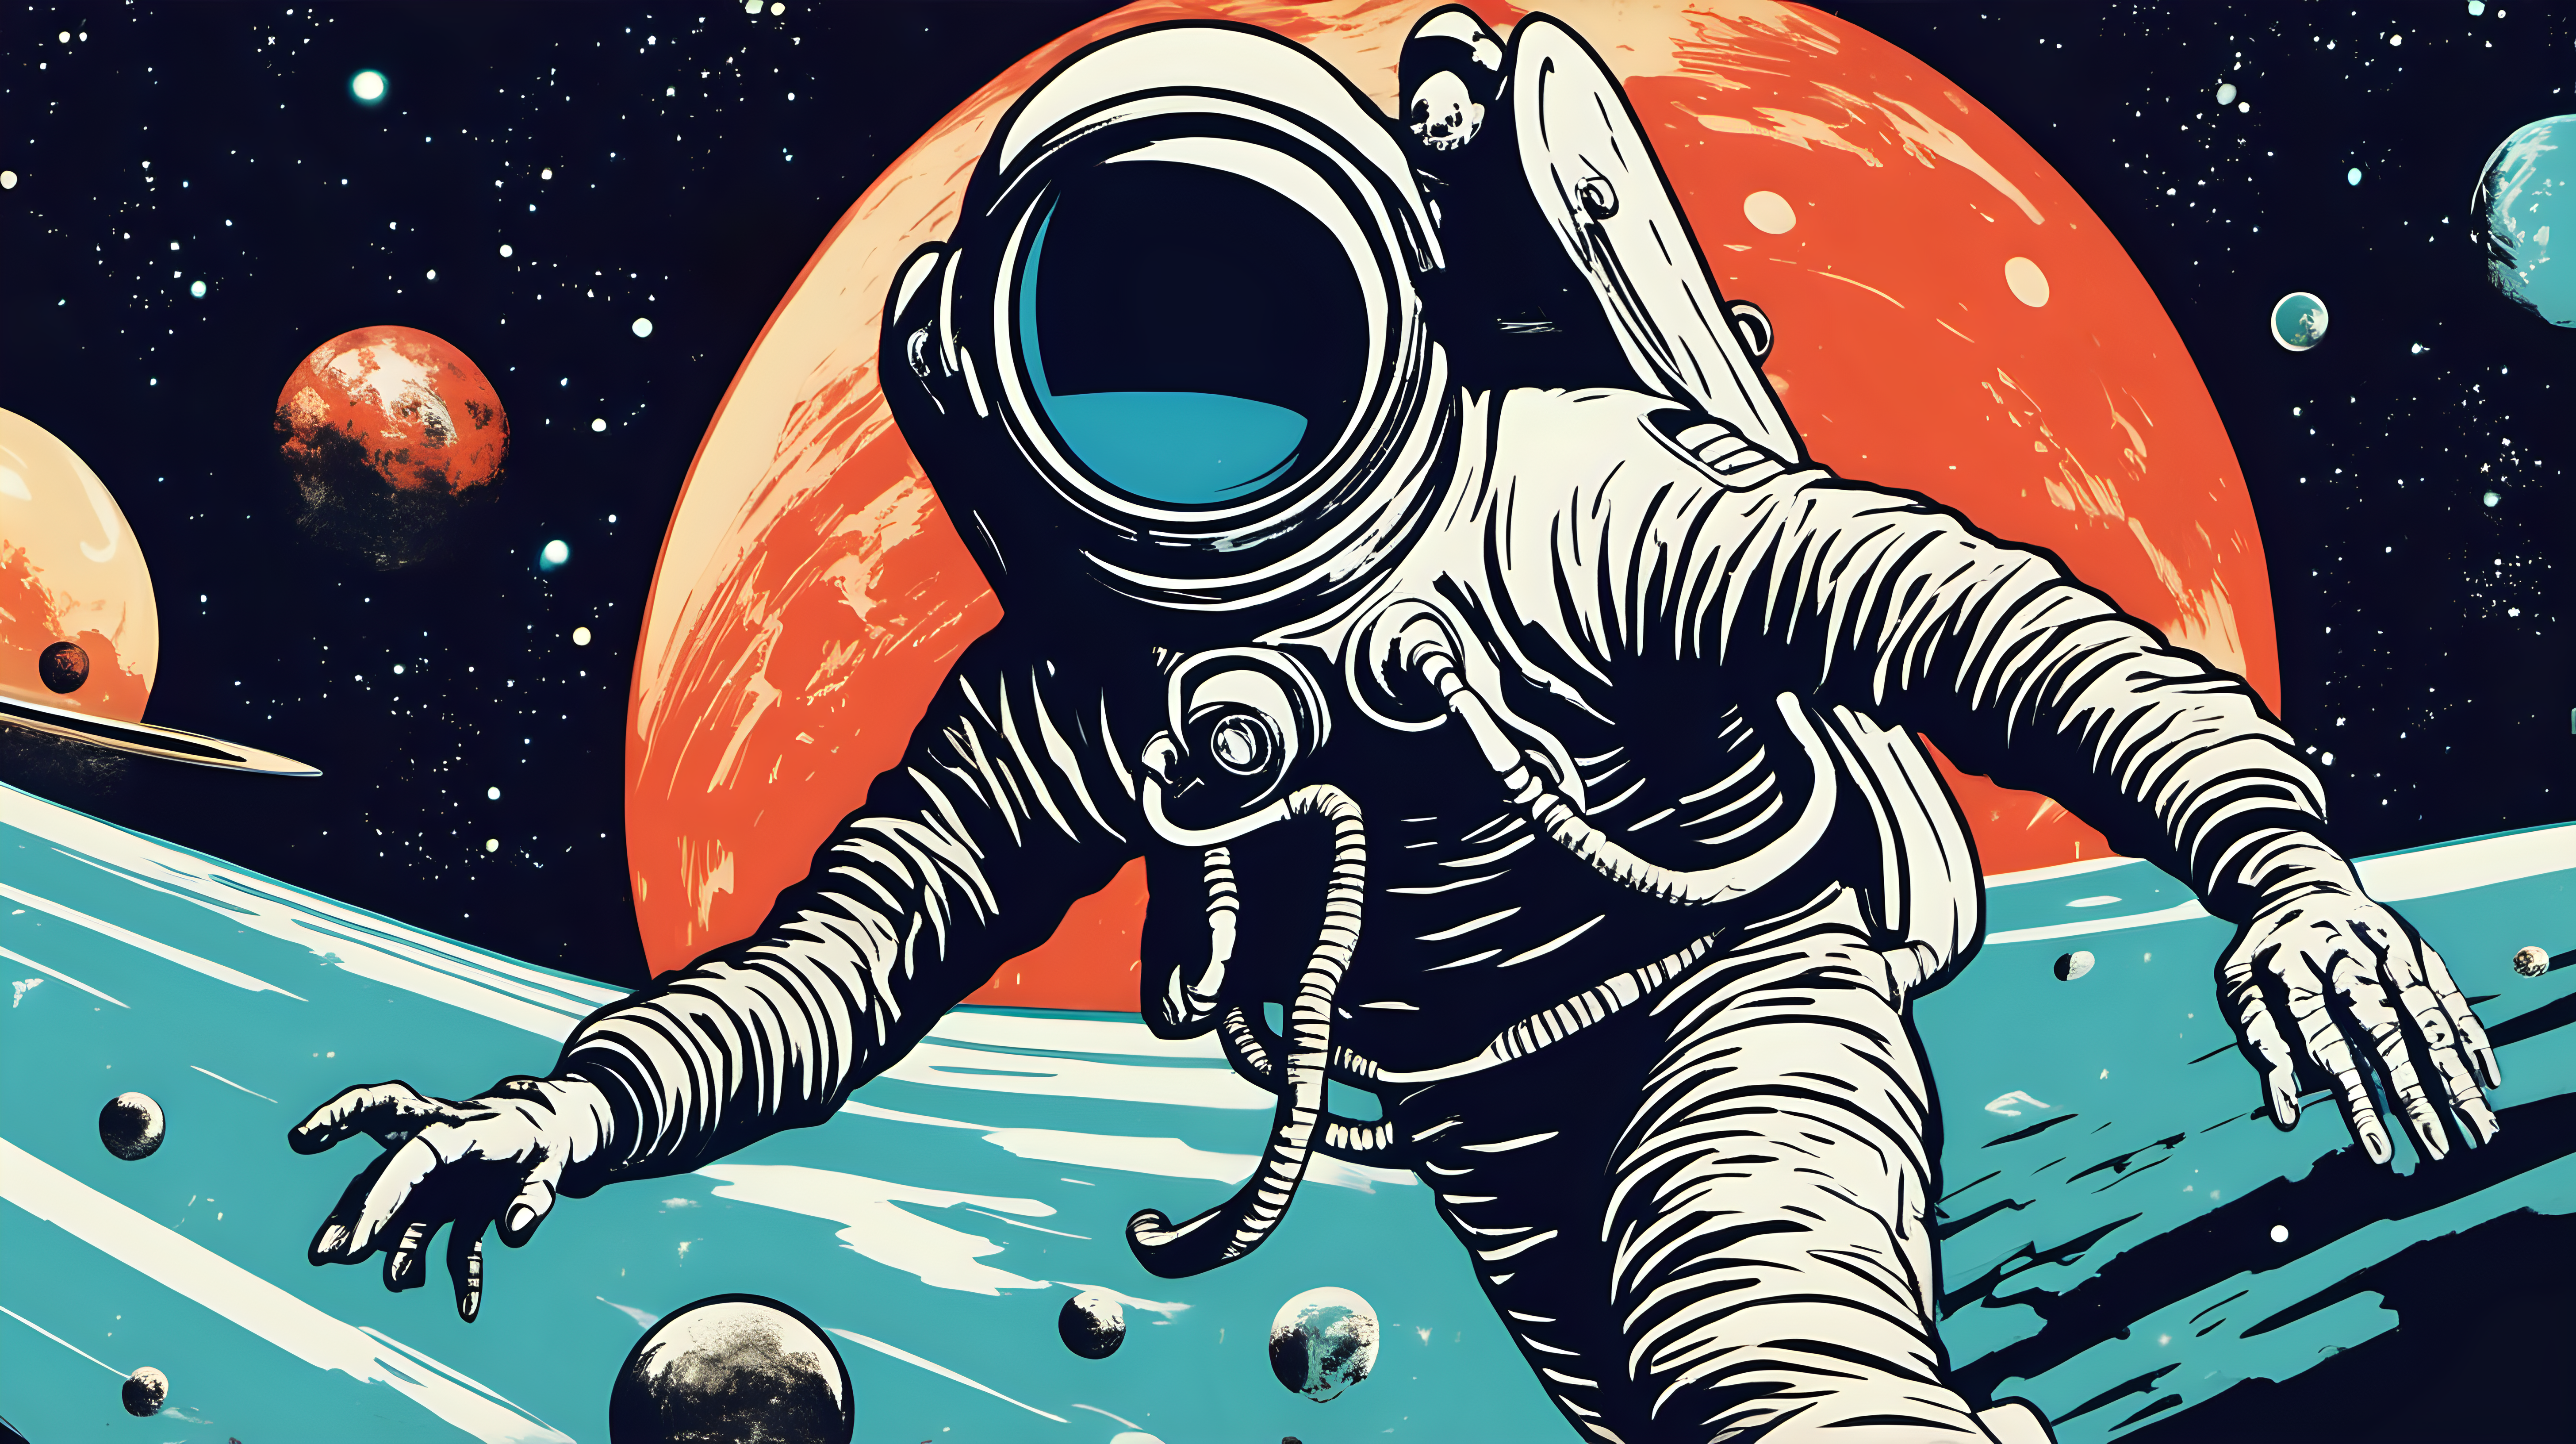 A 1950's-era science fiction spaceman floating in space, a ringed planet behind him. Pop Art style.